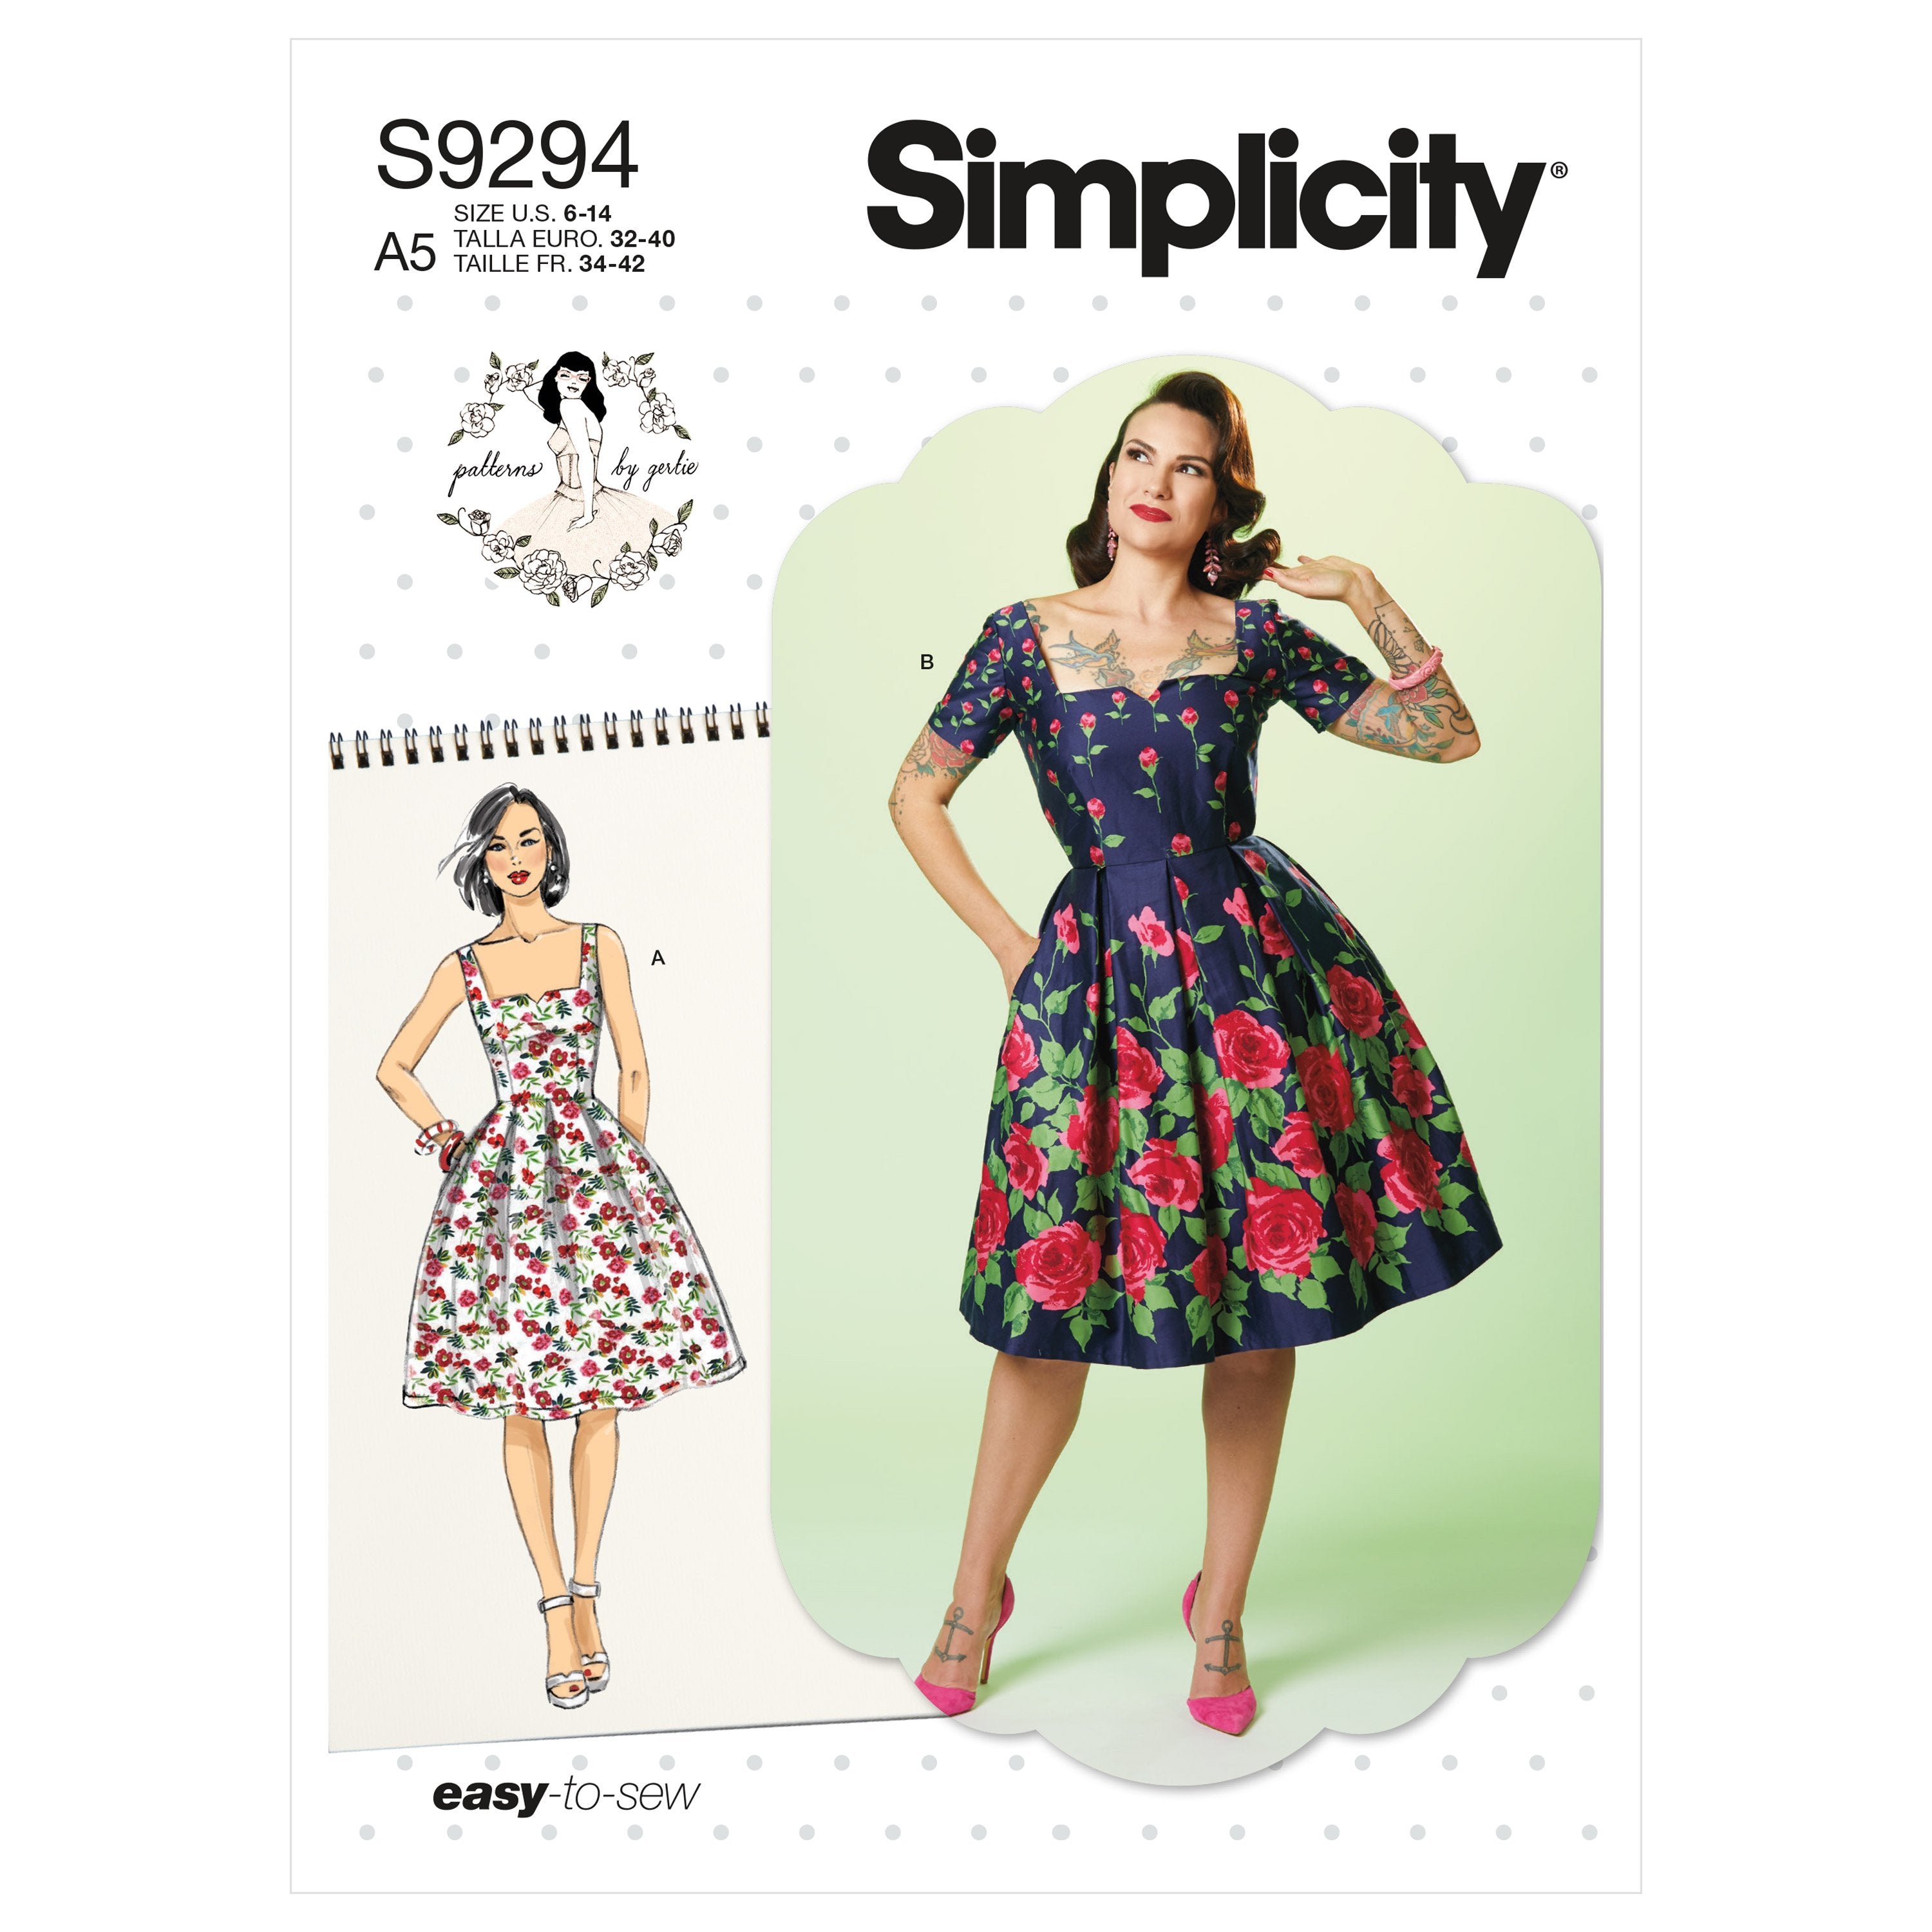 Simplicity 1950's Sewing Pattern 9294 Vintage Dress from Jaycotts Sewing Supplies